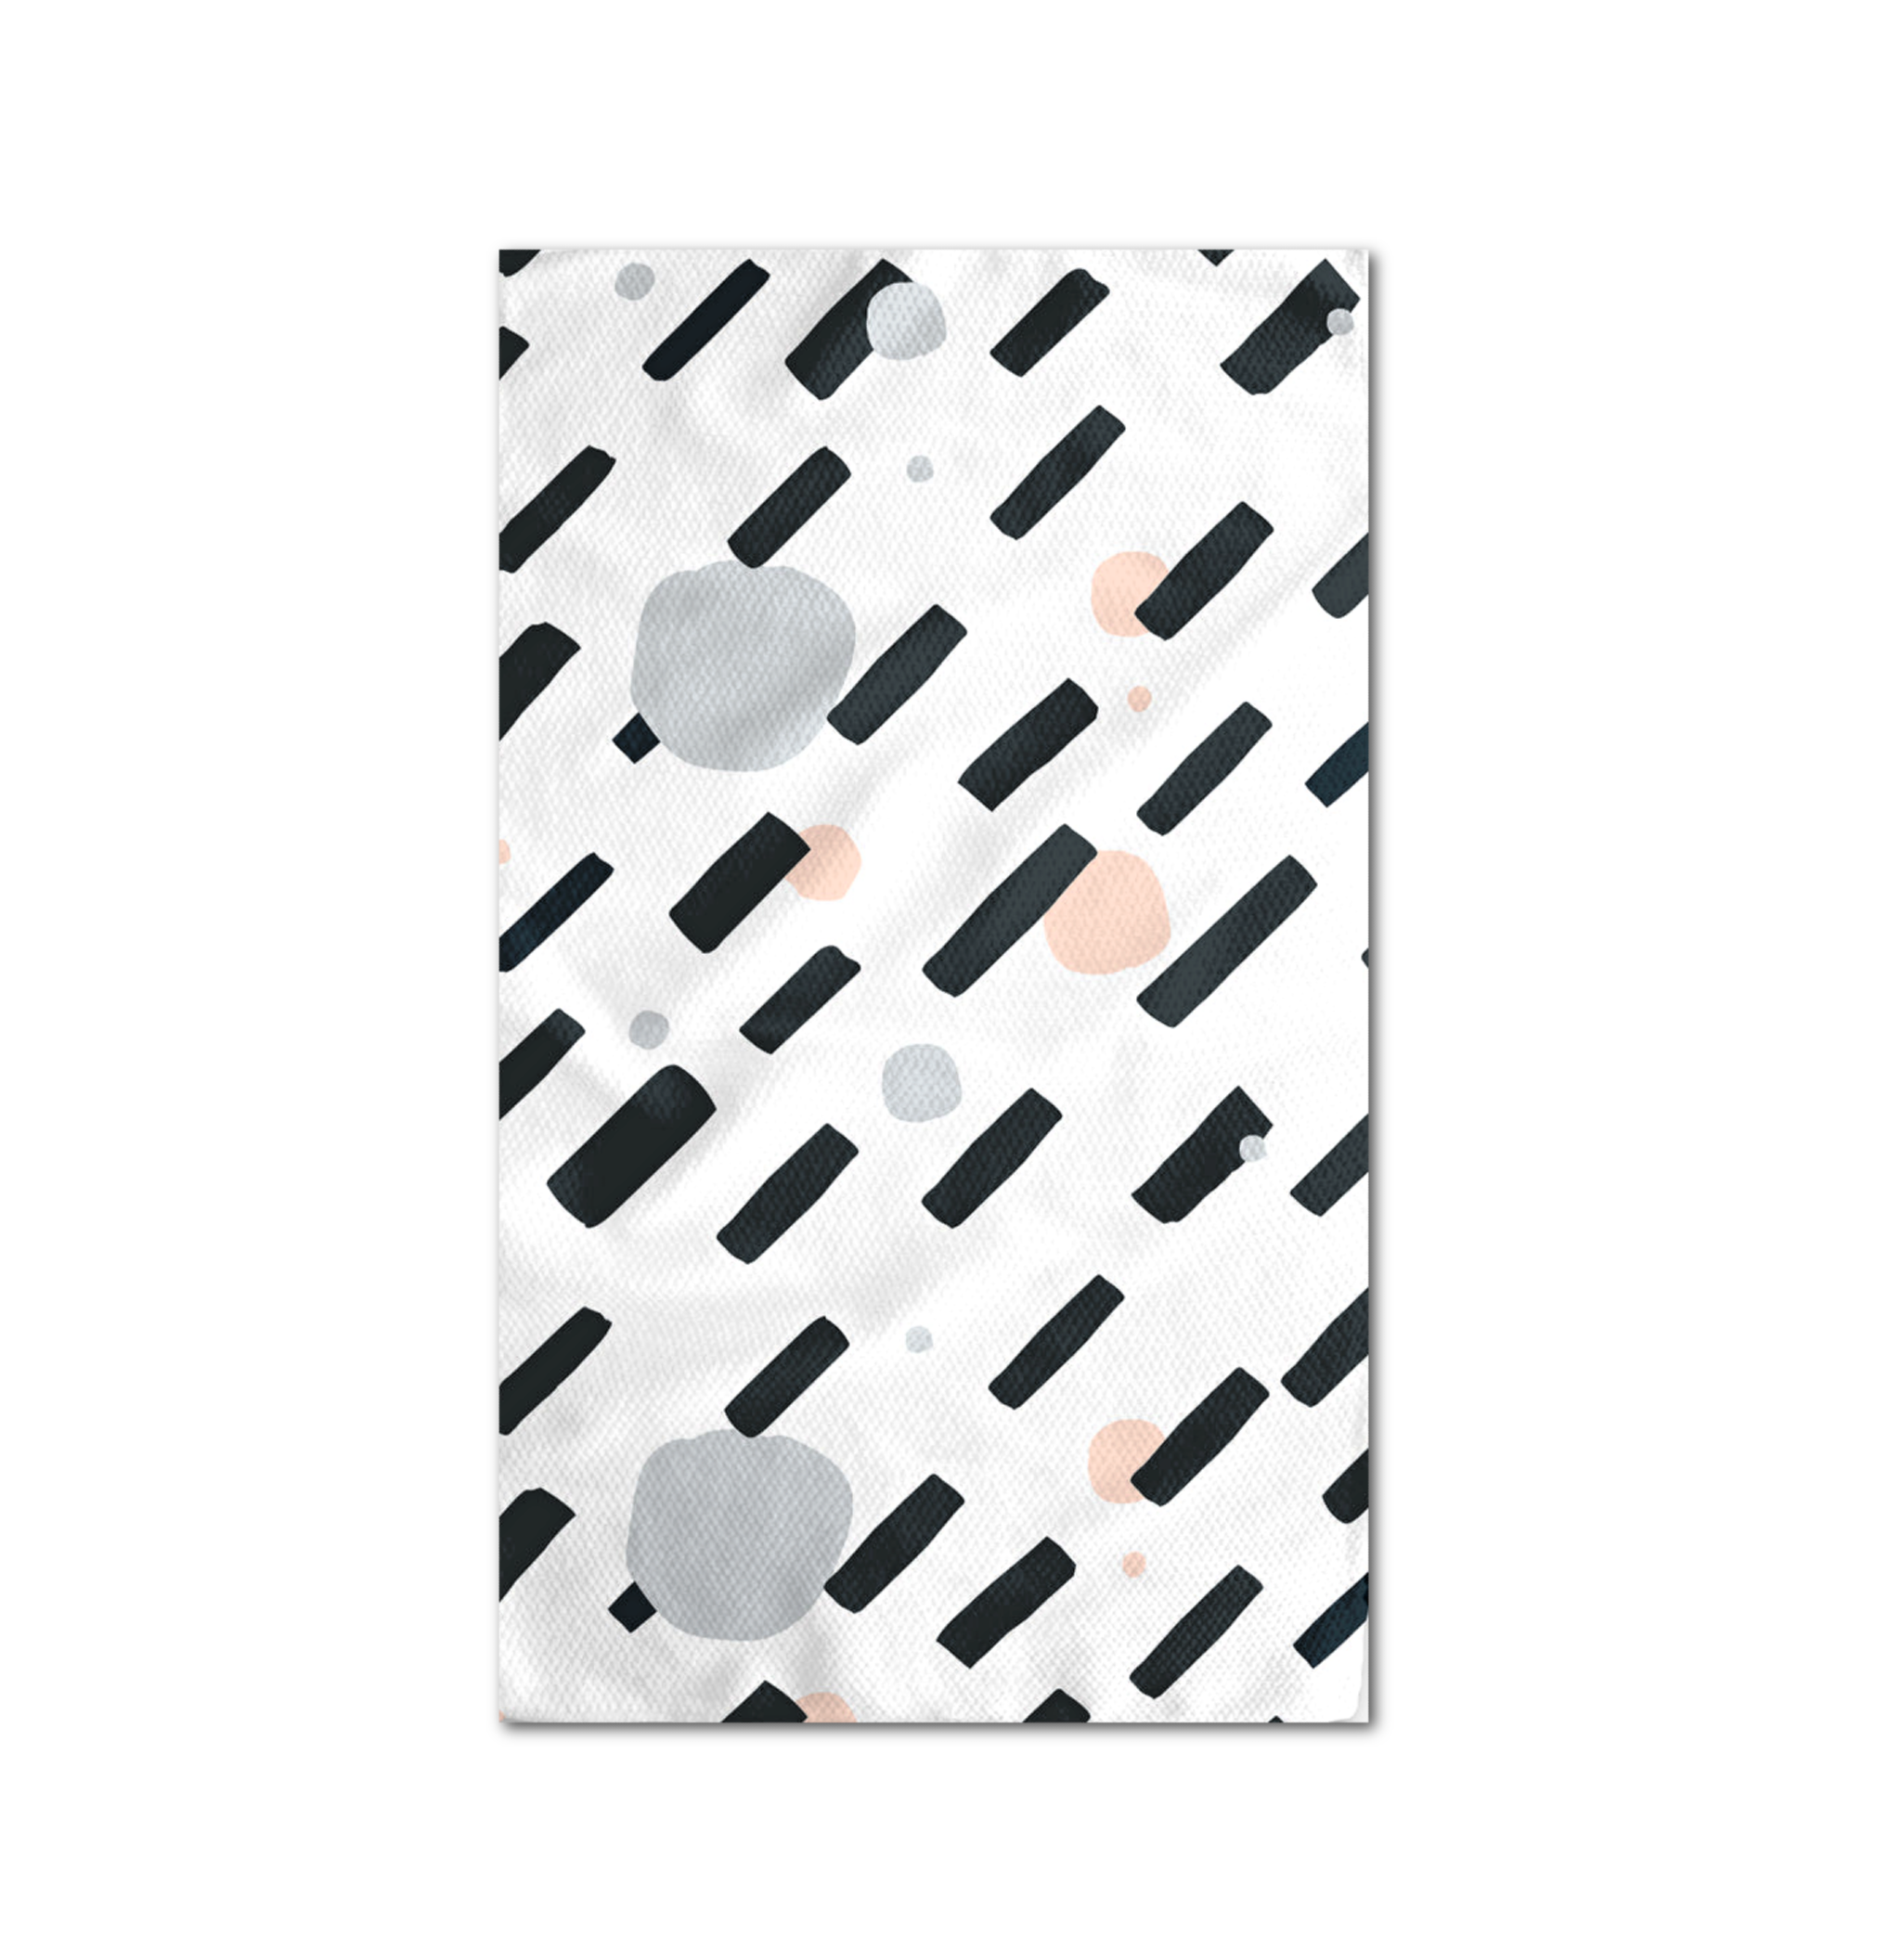 Geometry Modern Kitchen and Hand Towels at DLK